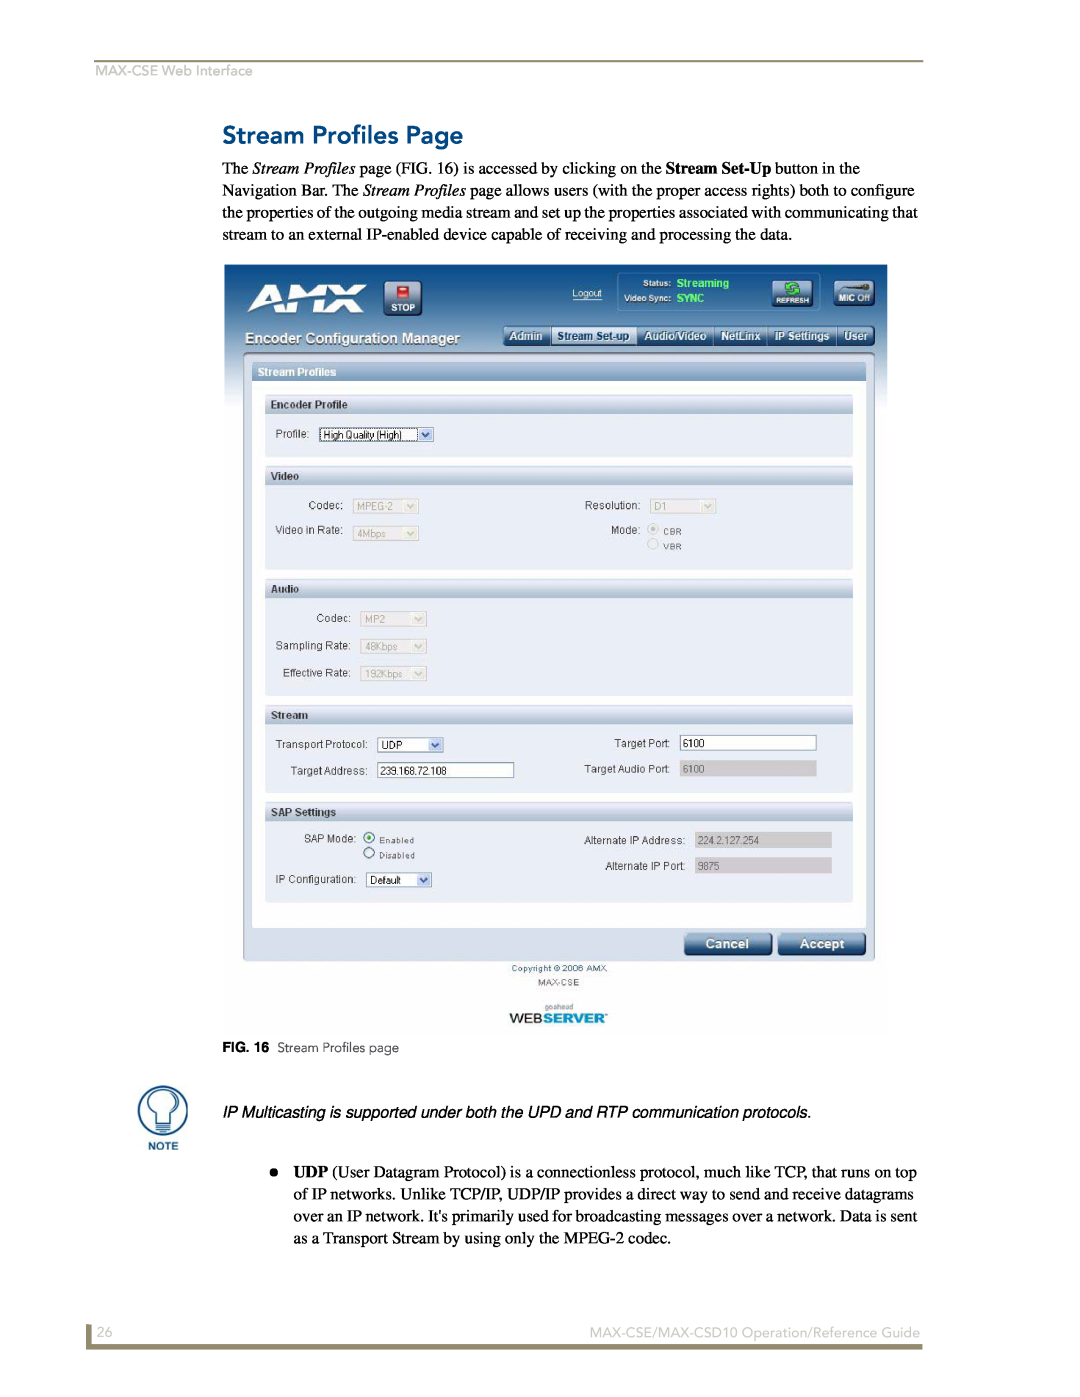 AMX manual Stream Profiles Page, MAX-CSEWeb Interface, MAX-CSE/MAX-CSD10Operation/Reference Guide 